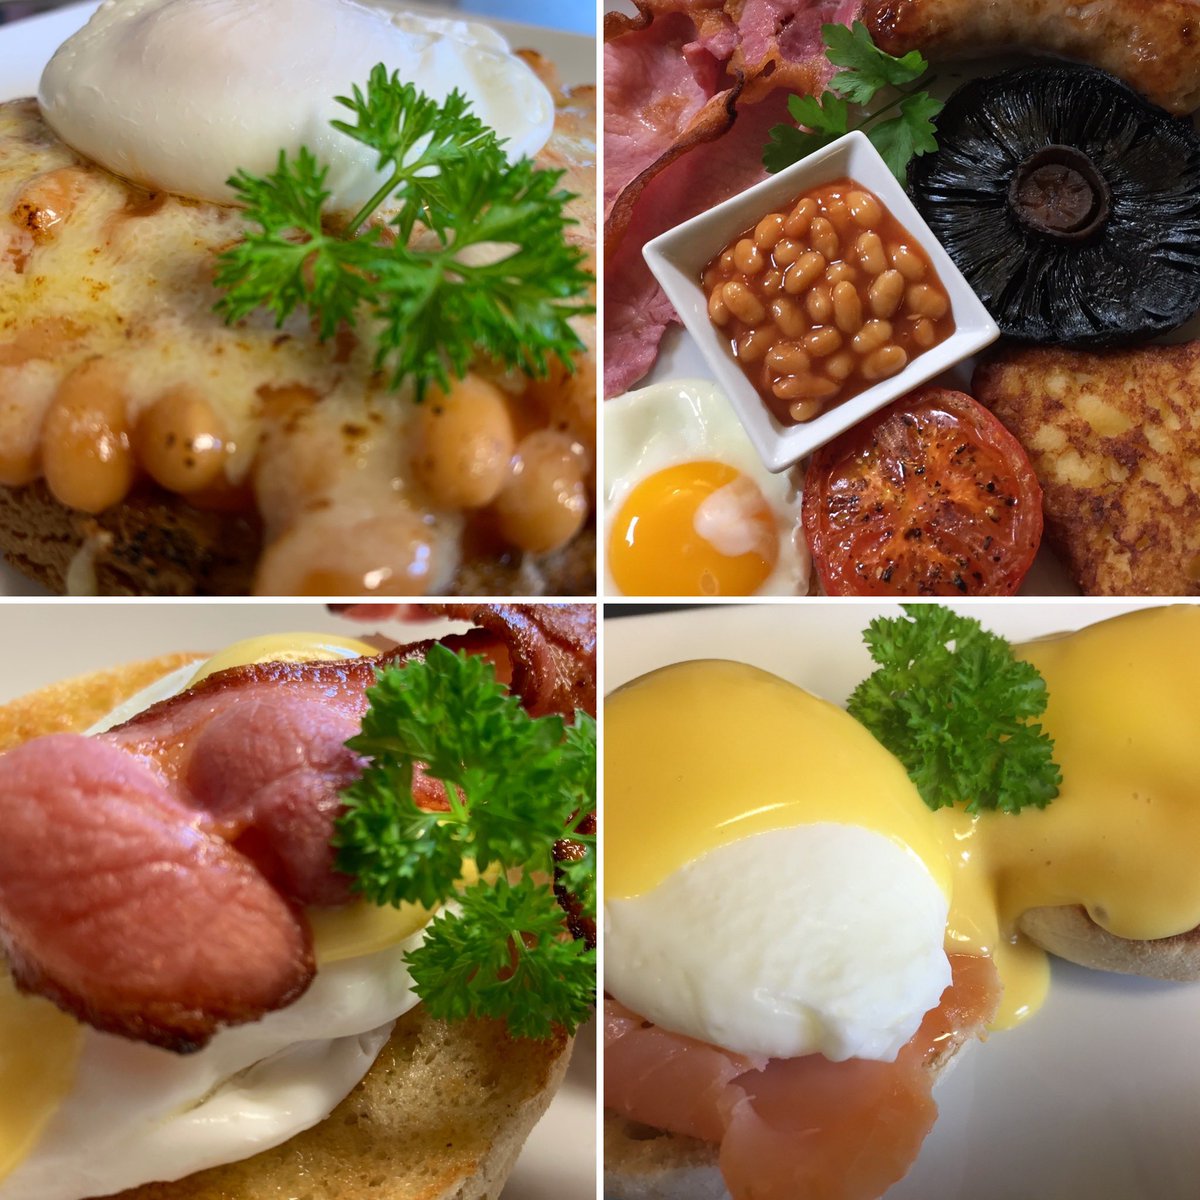 How’s your weekend going? Are you dreaming of enjoying our breakfasts again?